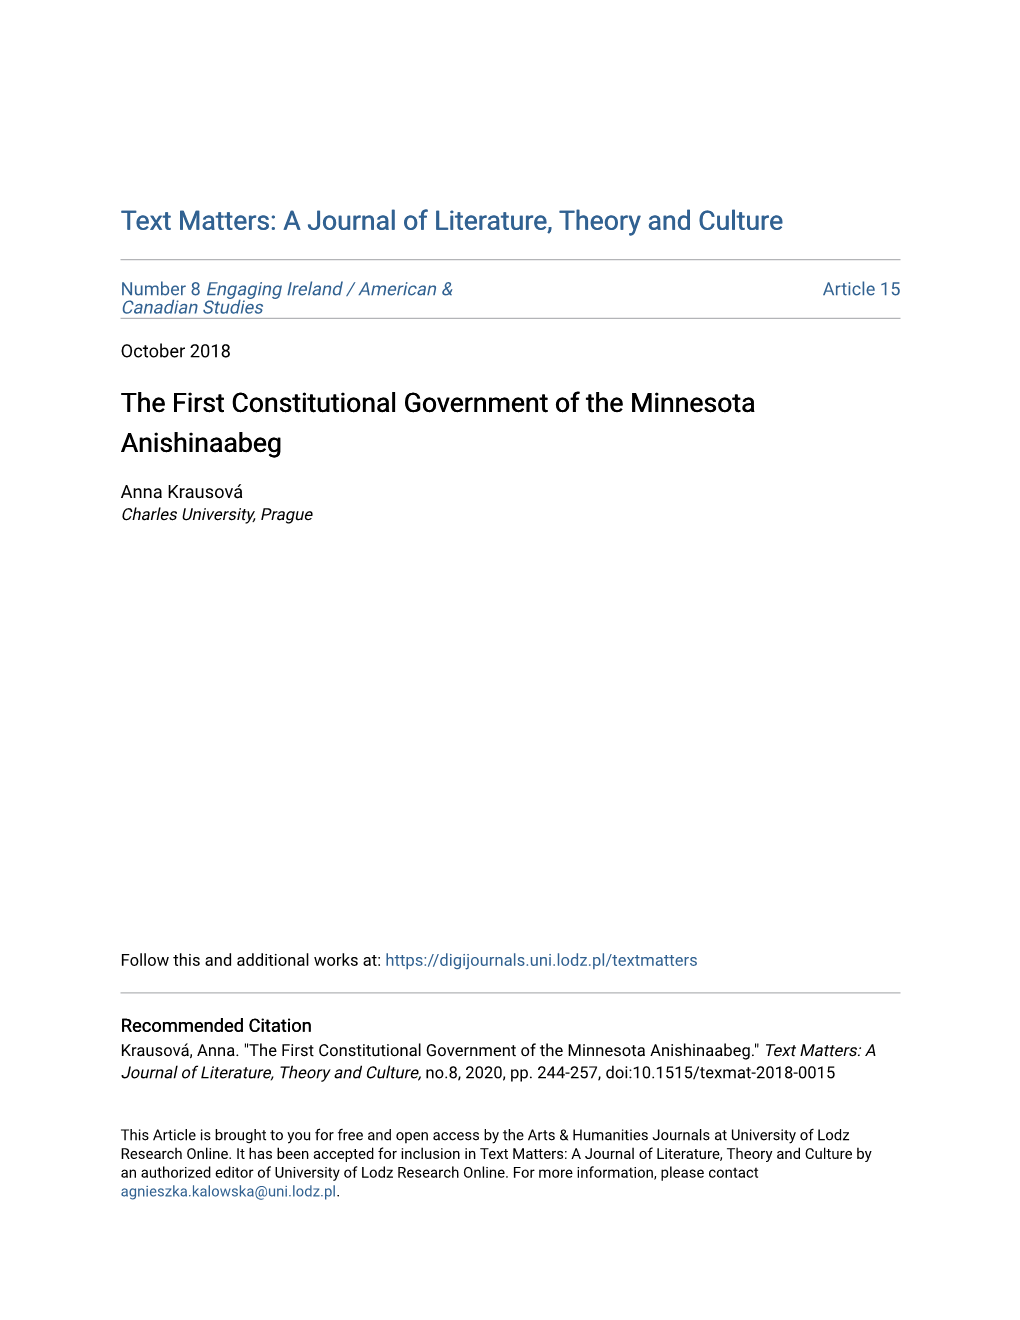 The First Constitutional Government of the Minnesota Anishinaabeg